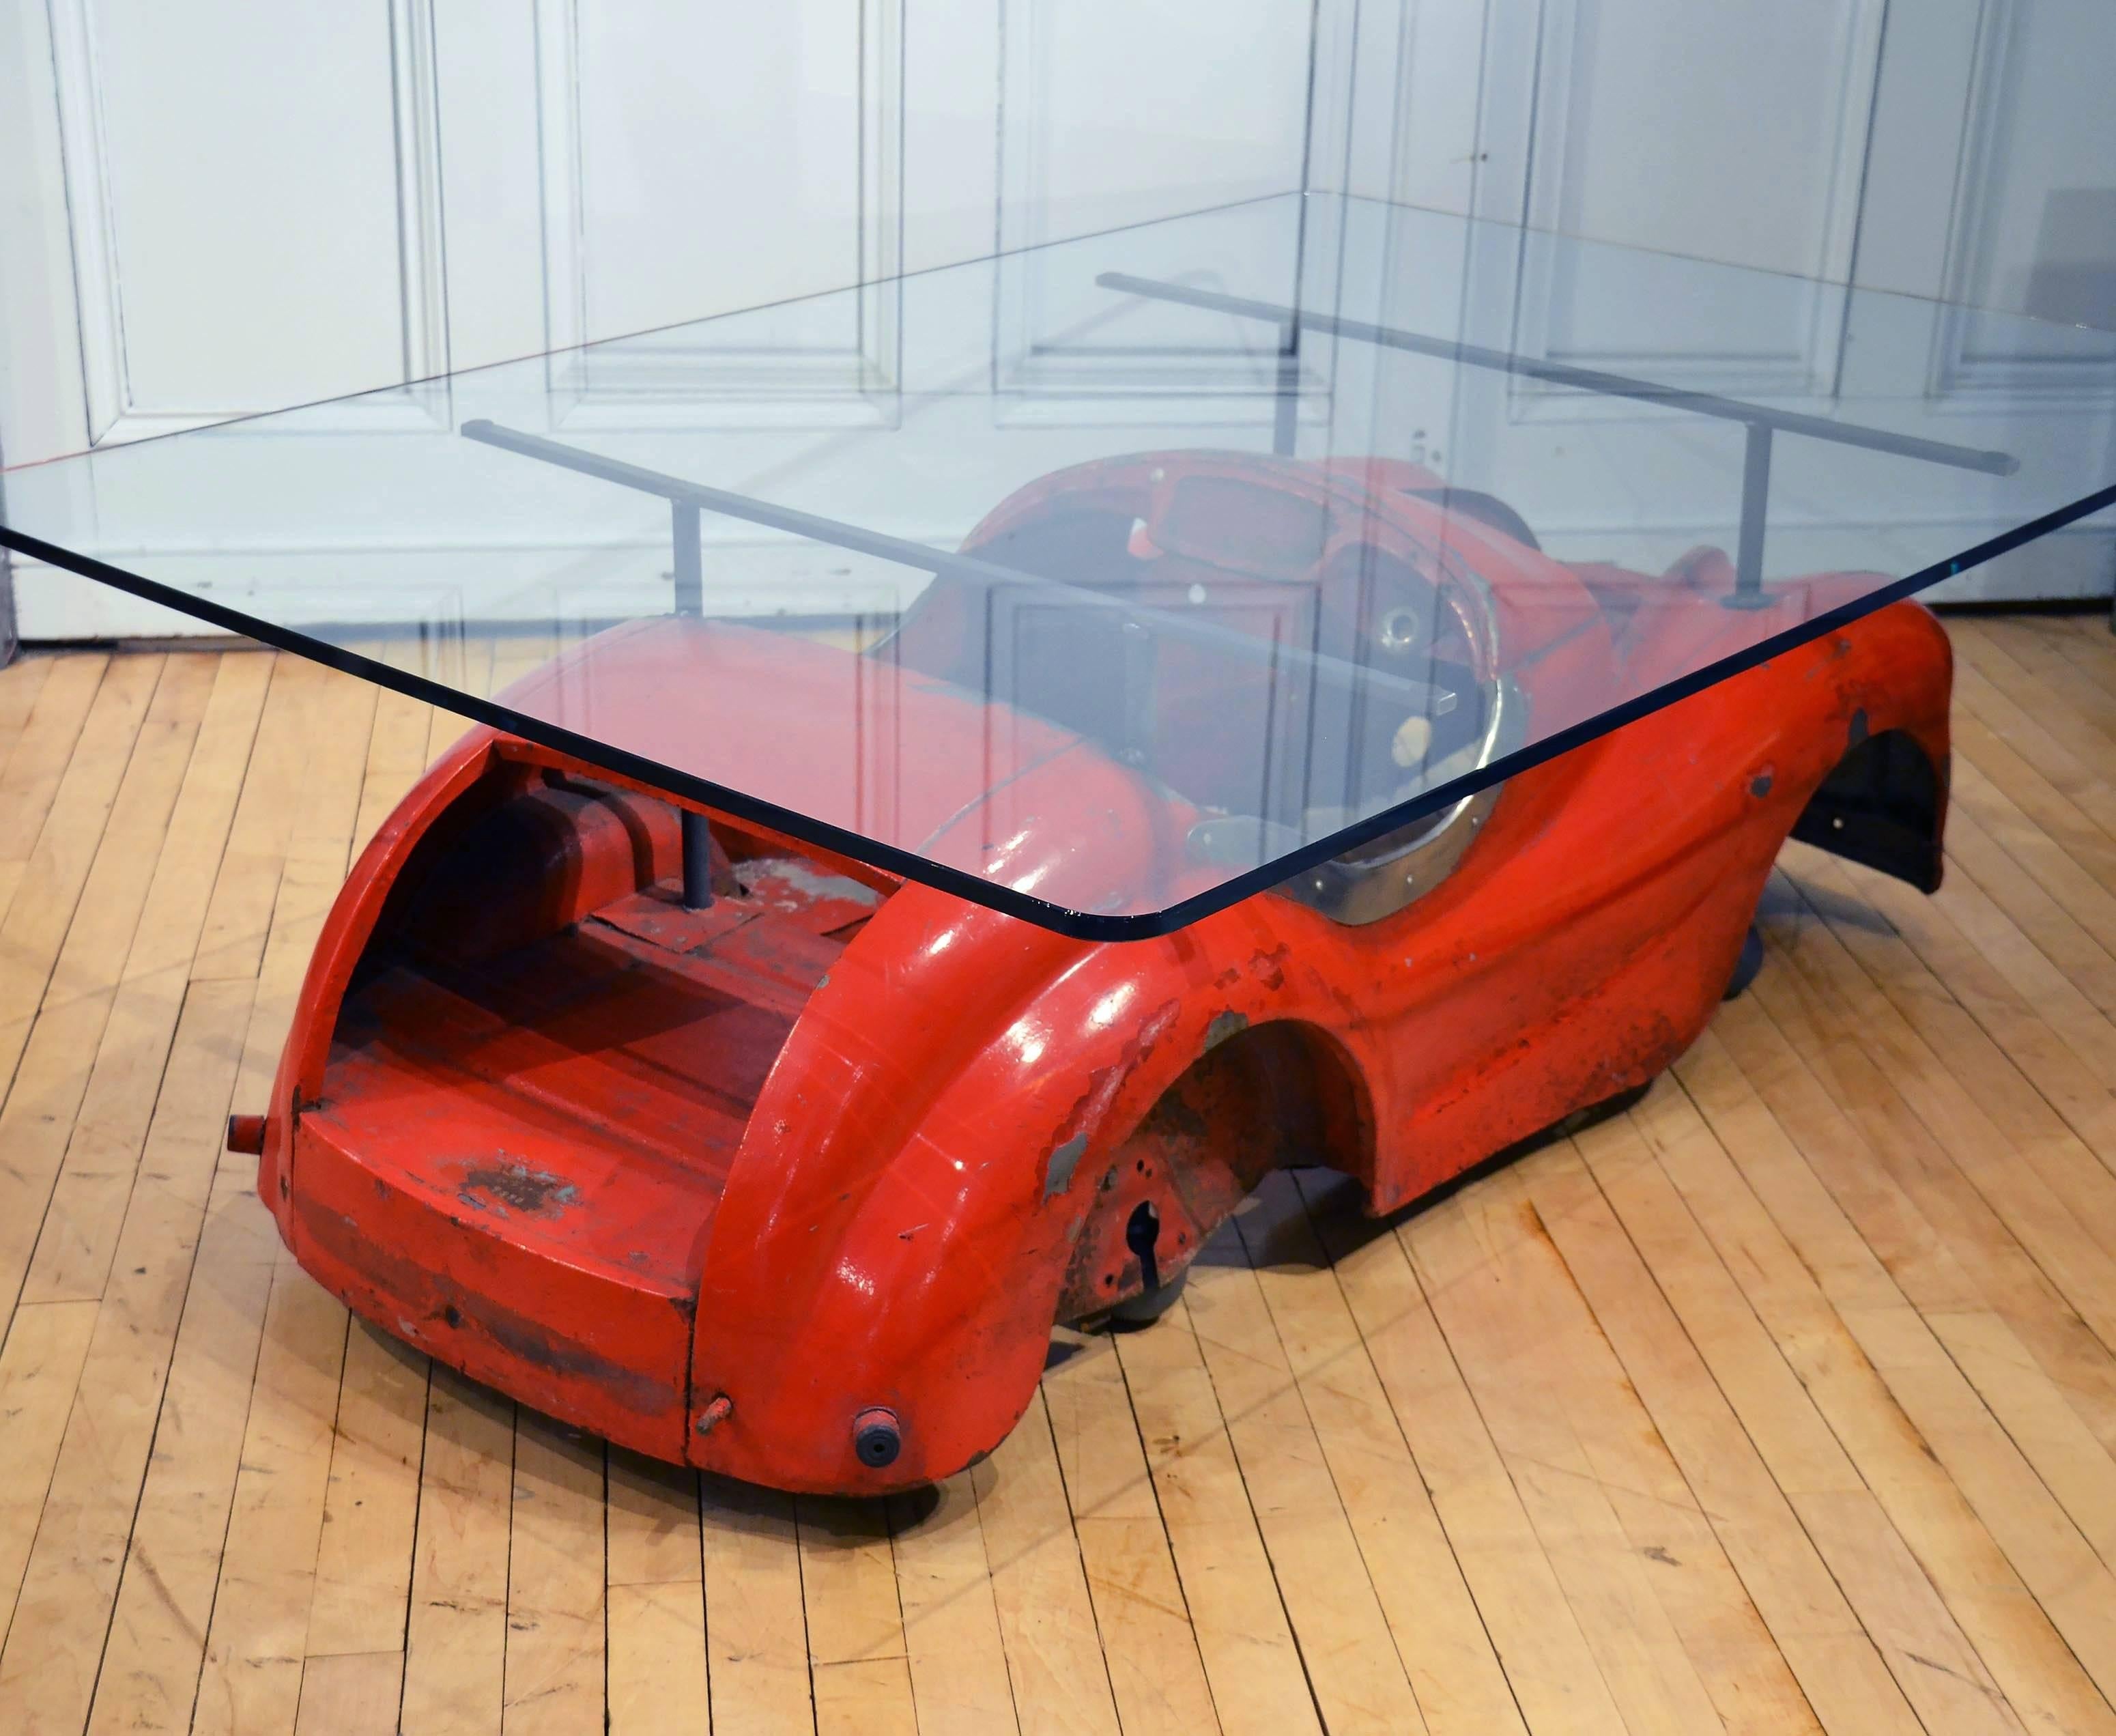 British 20th Century Industrial Coffee Table with Retro Toy Car Design